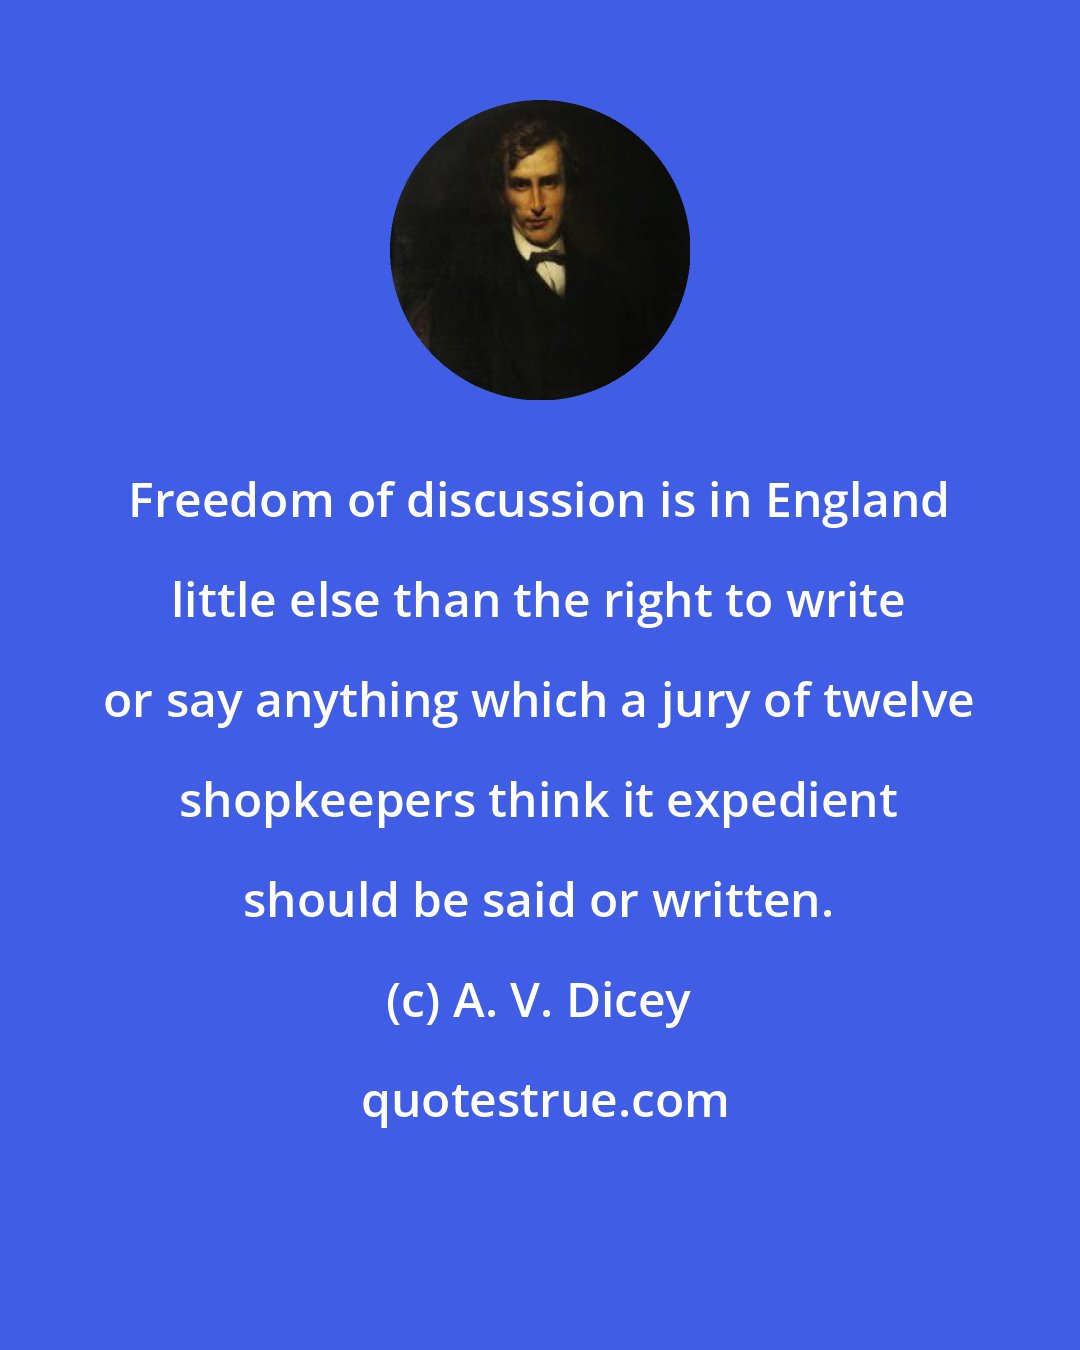 A. V. Dicey: Freedom of discussion is in England little else than the right to write or say anything which a jury of twelve shopkeepers think it expedient should be said or written.